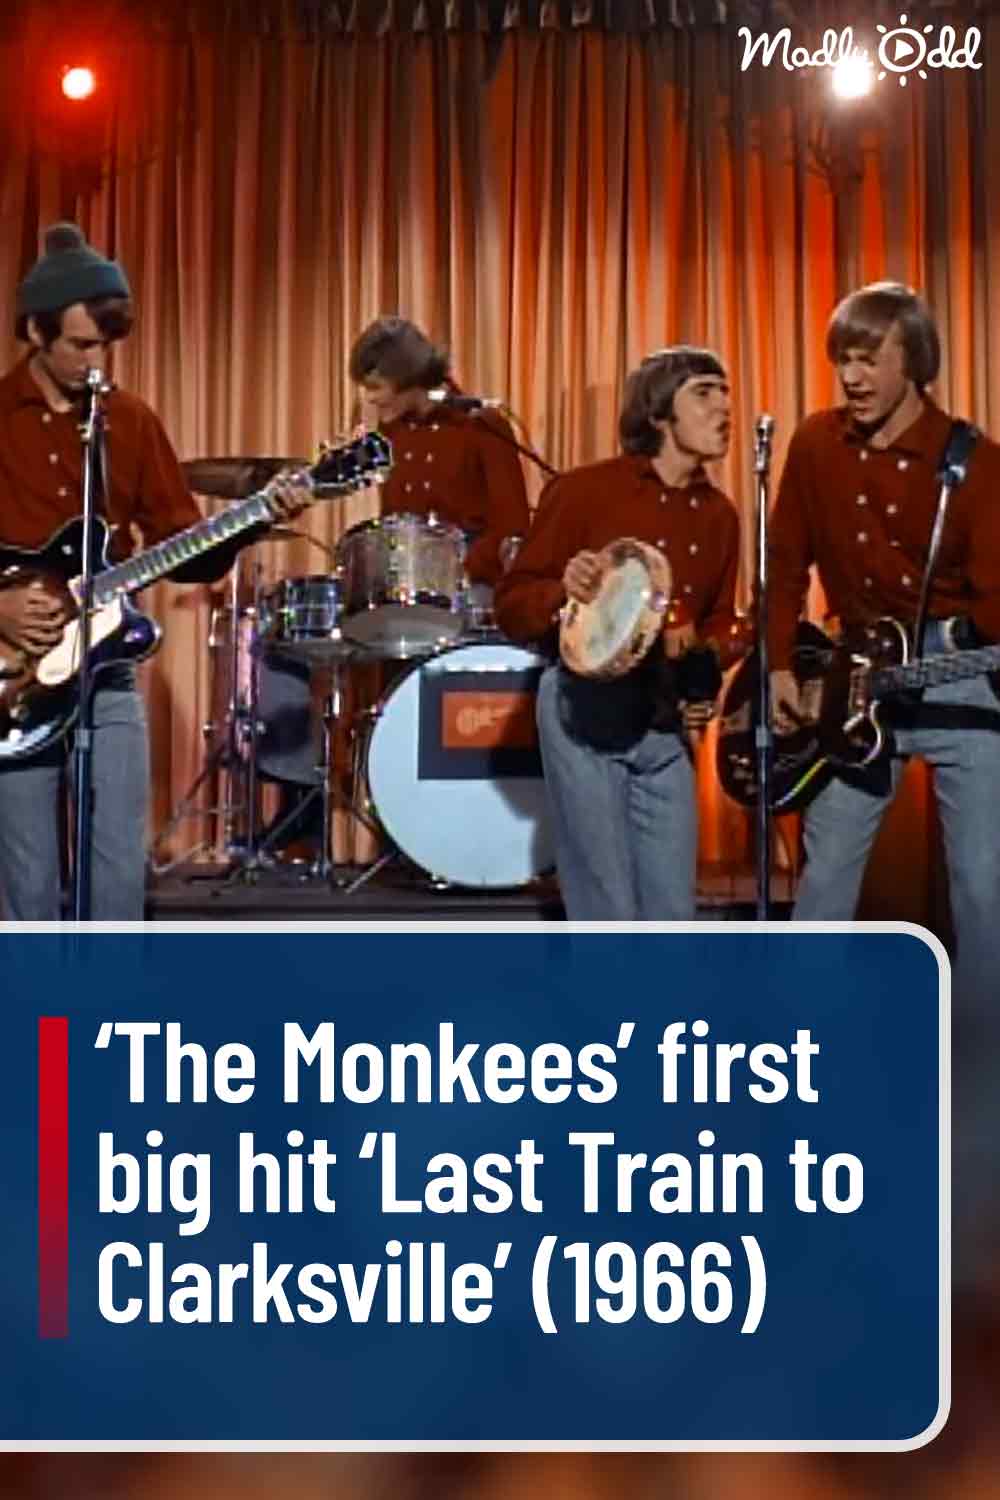 ‘The Monkees’ first big hit ‘Last Train to Clarksville’ (1966)